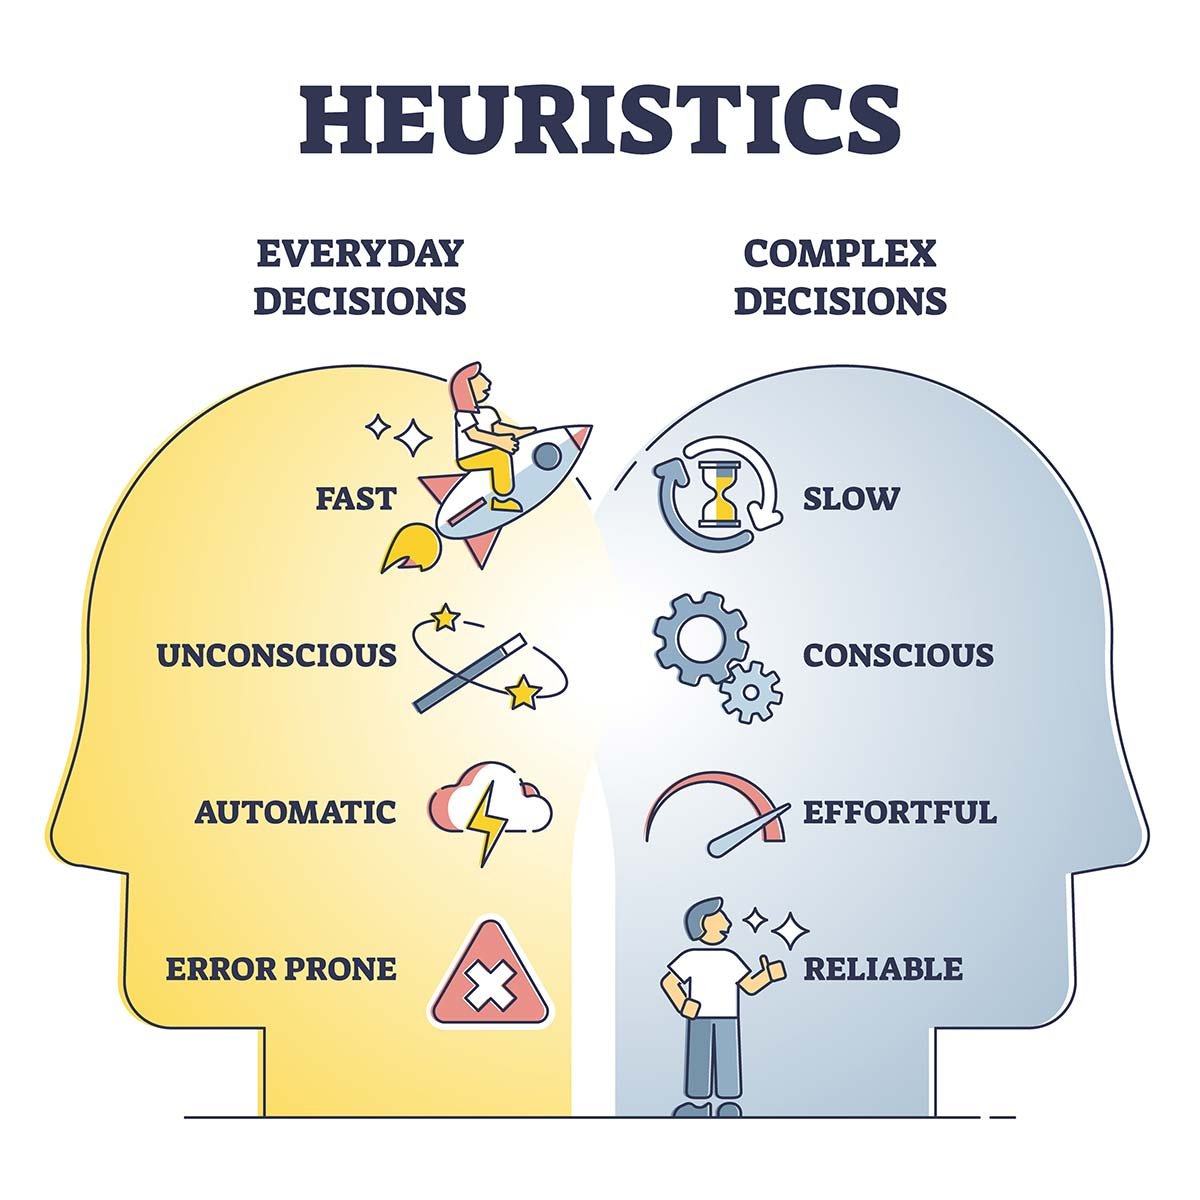 Heuristics decisions and mental thinking shortcut approach outline diagram. Everyday vs complex technique comparison list for judgments and fast, short term problem solving method vector 